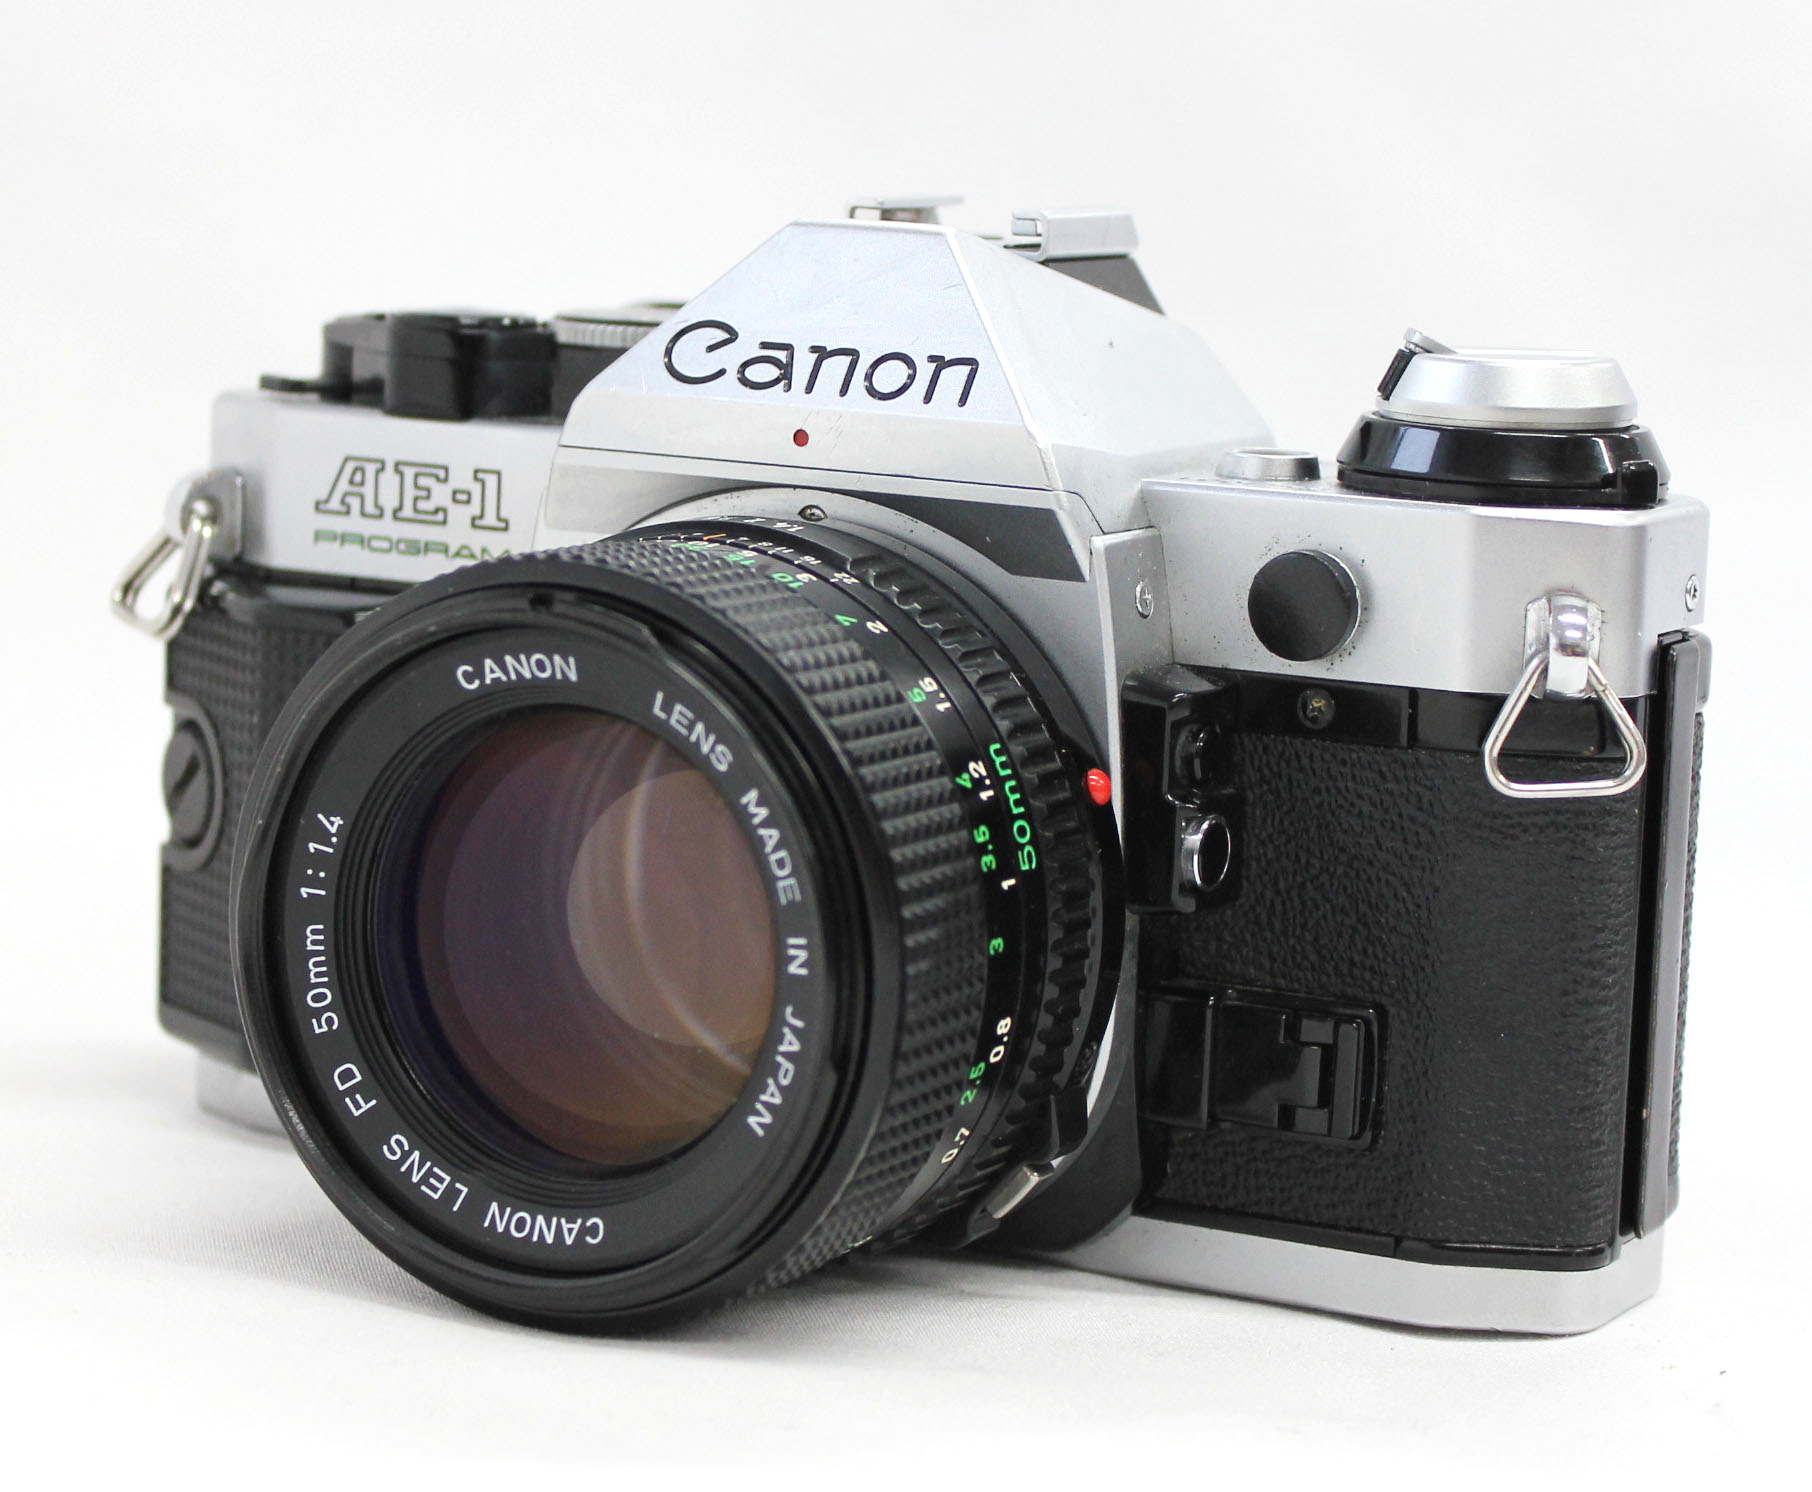 Japan Used Camera Shop | Canon AE-1 Program 35mm SLR Film Camera with New FD NFD 50mm F/1.4 Lens from Japan